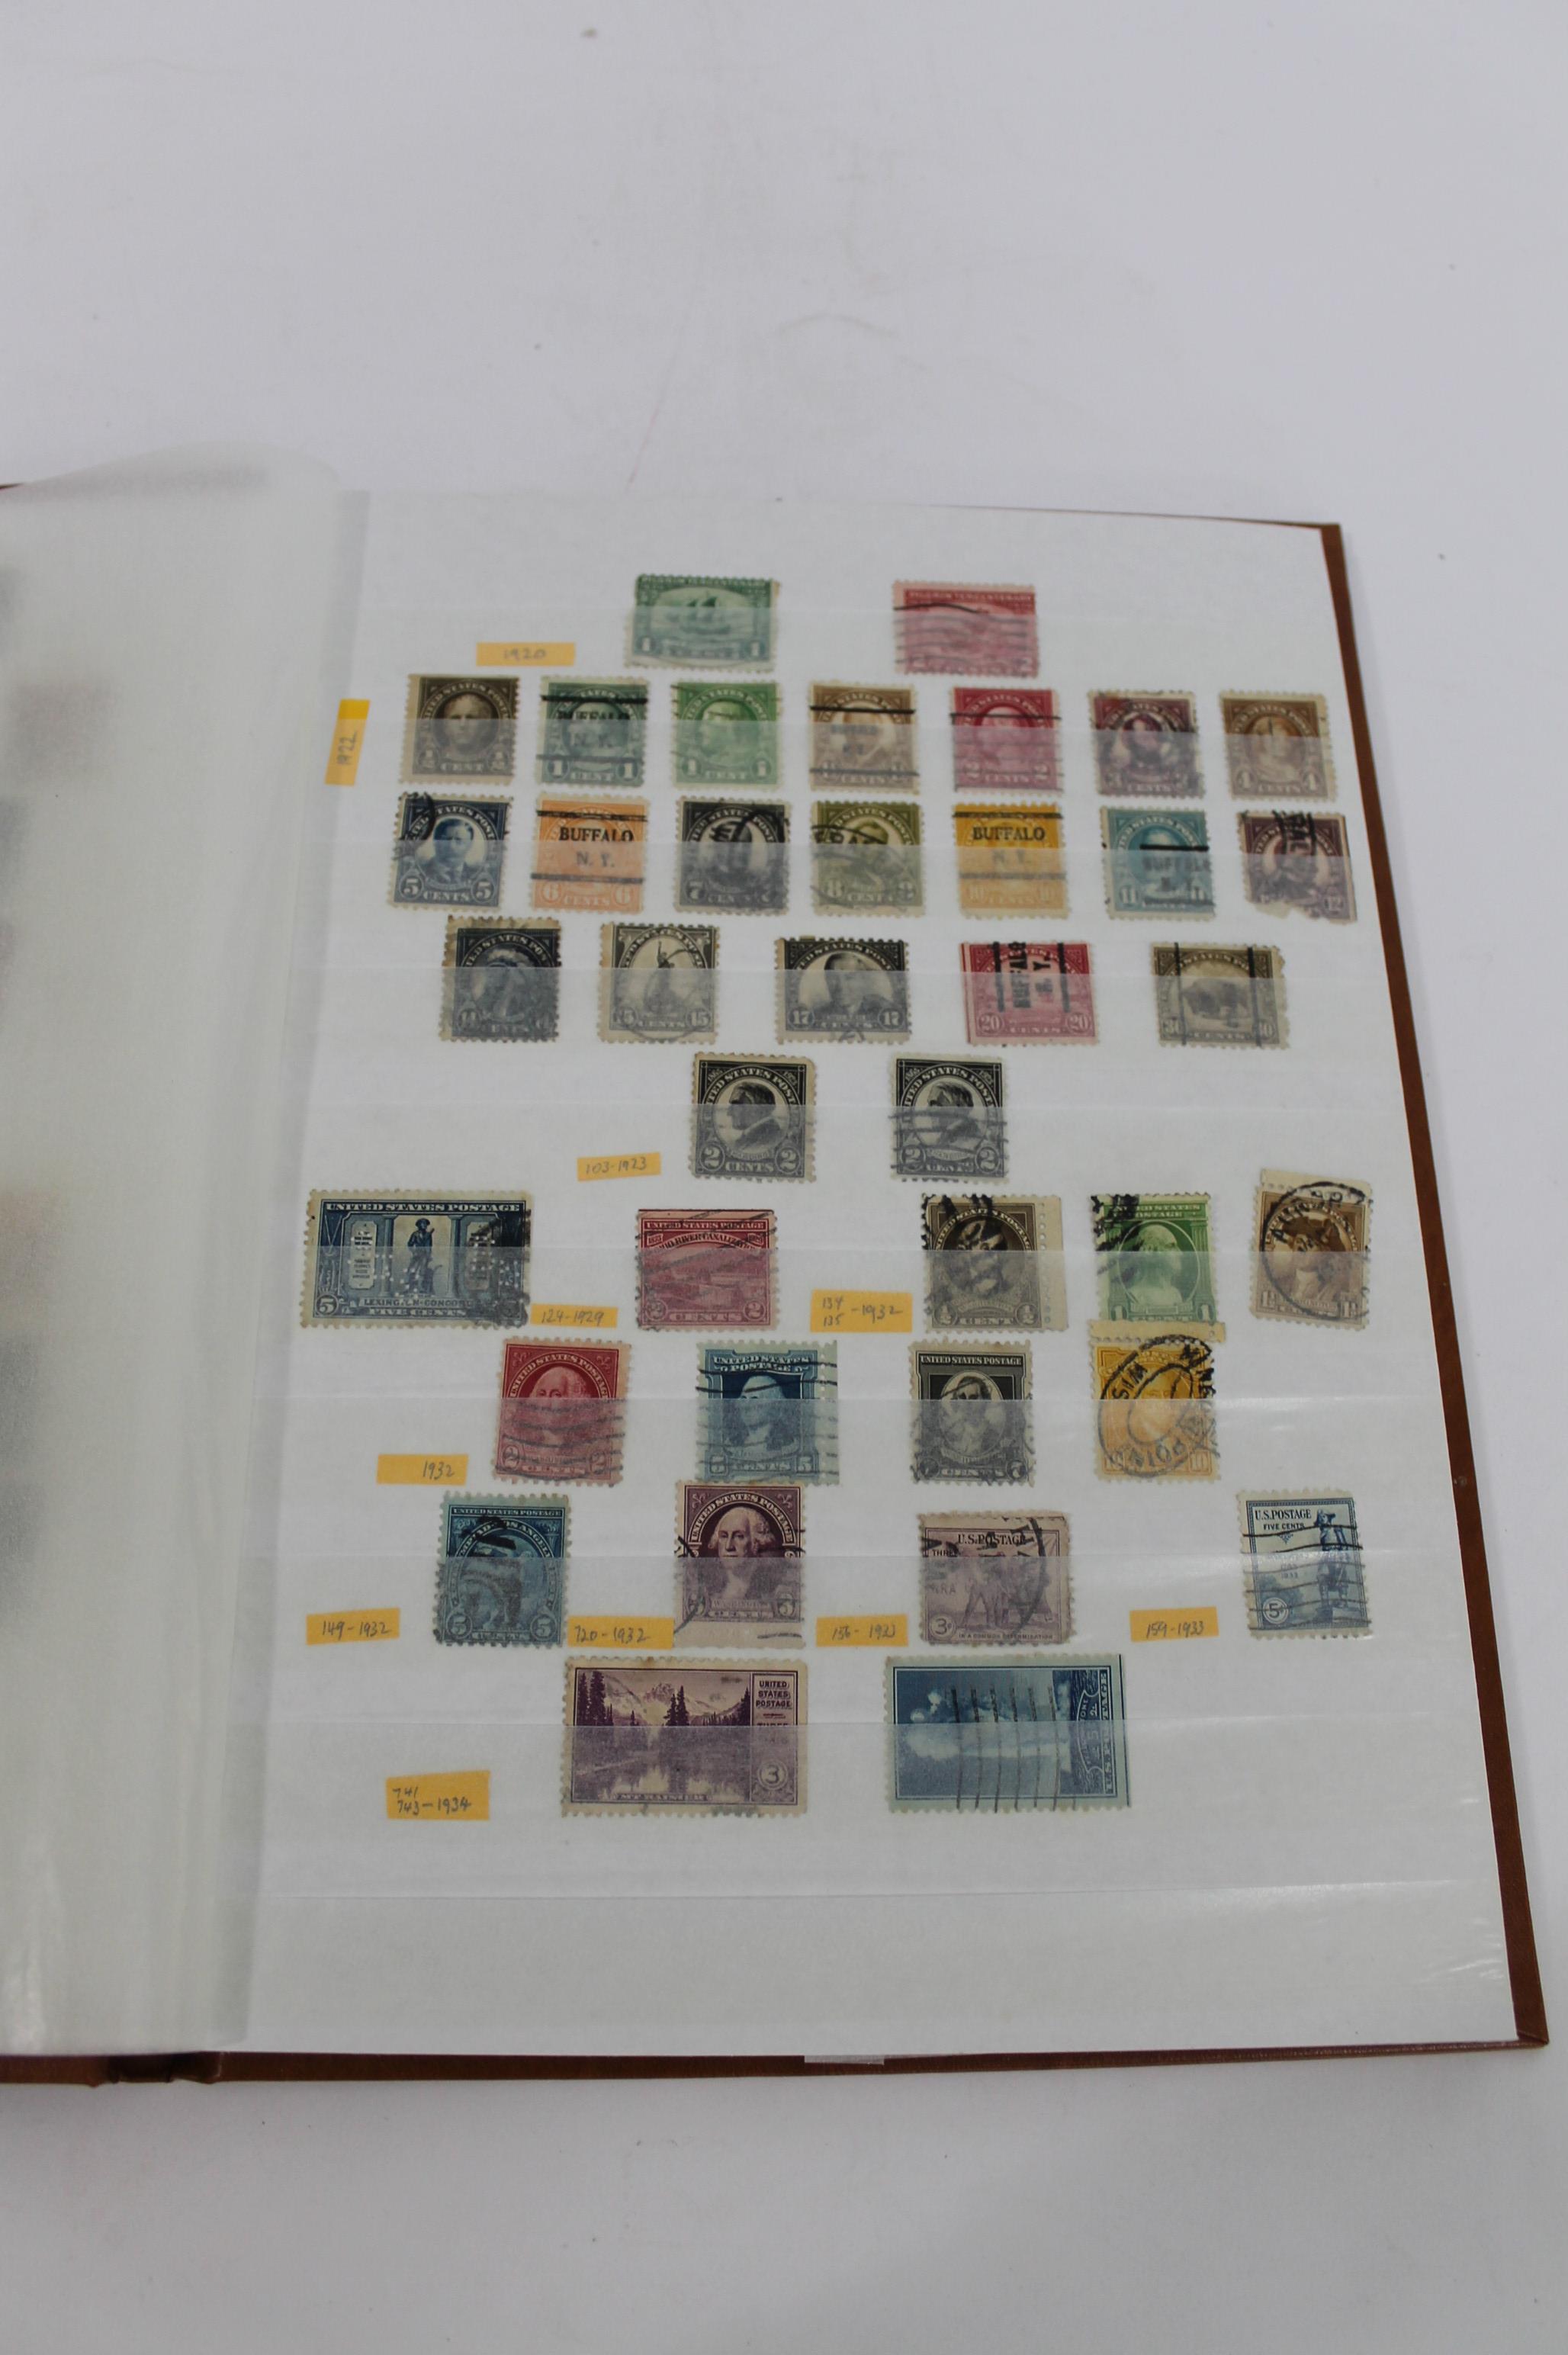 EUROPE & WORLD STAMPS 7 albums including 19th and 20thc used European stamps, Denmark, Finland, - Image 4 of 17